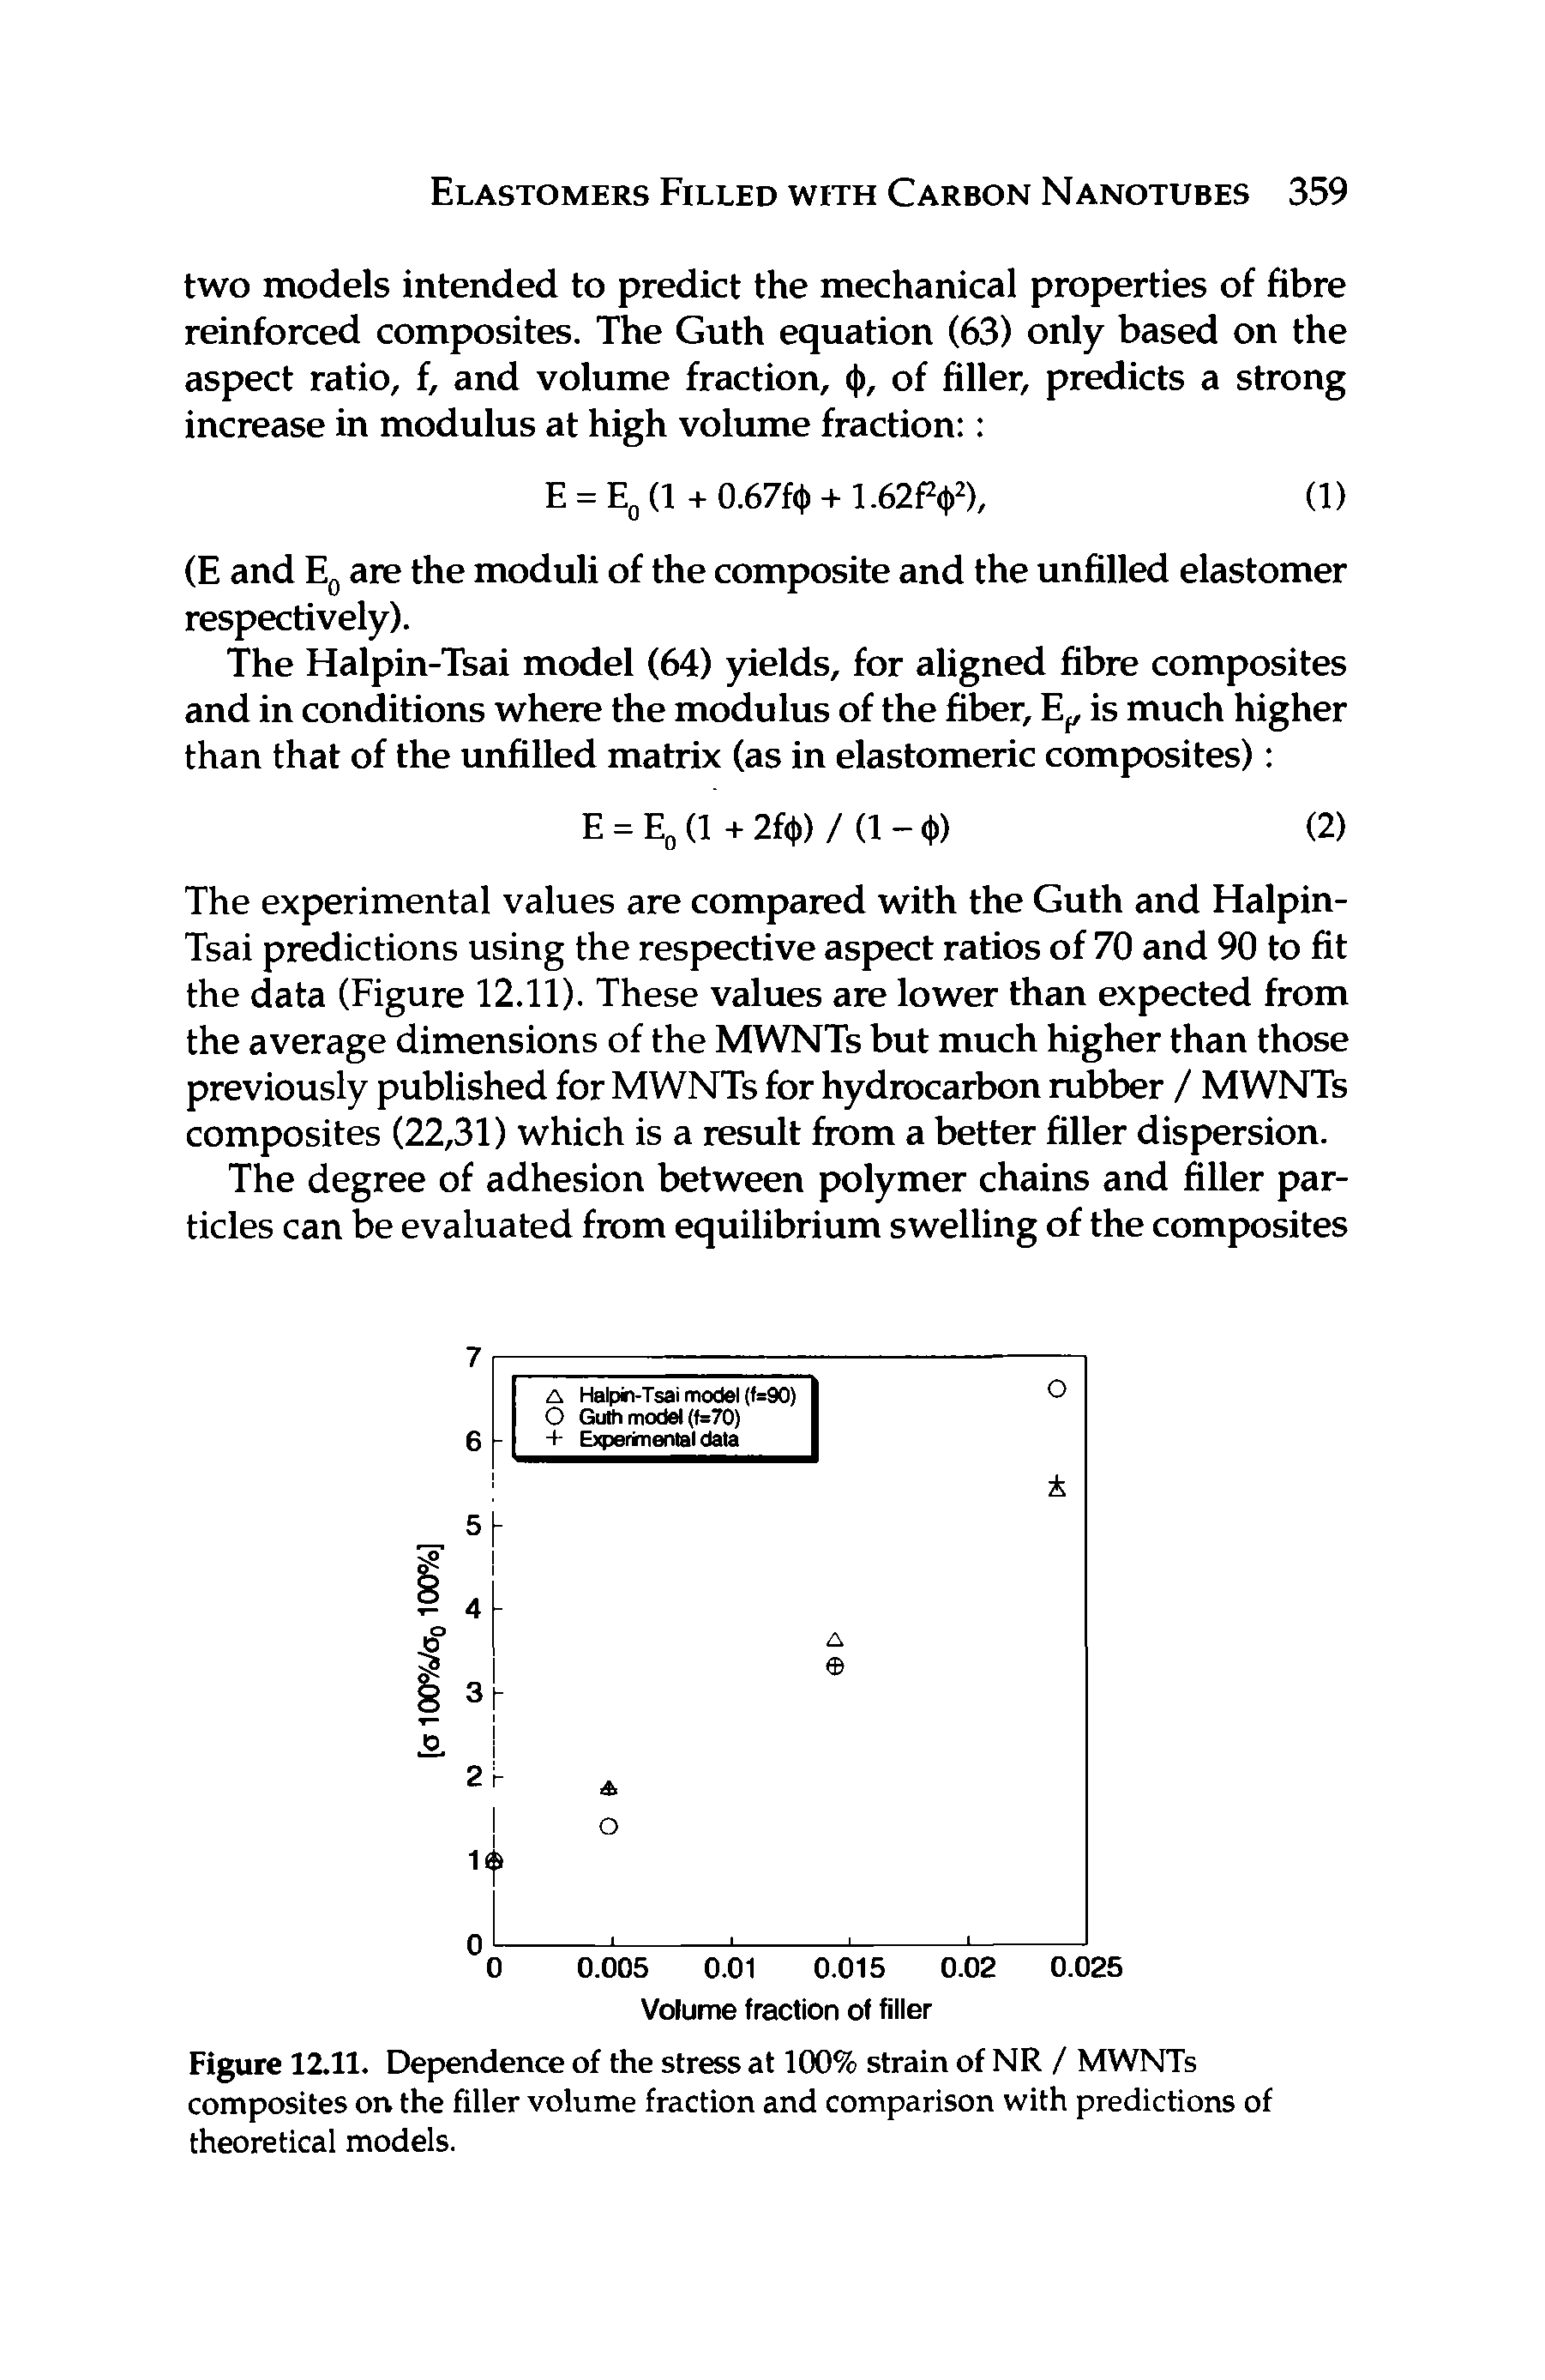 Figure 12.11. Dependence of the stress at 100% strain of NR / MWNTs composites on the filler volume fraction and comparison with predictions of theoretical models.